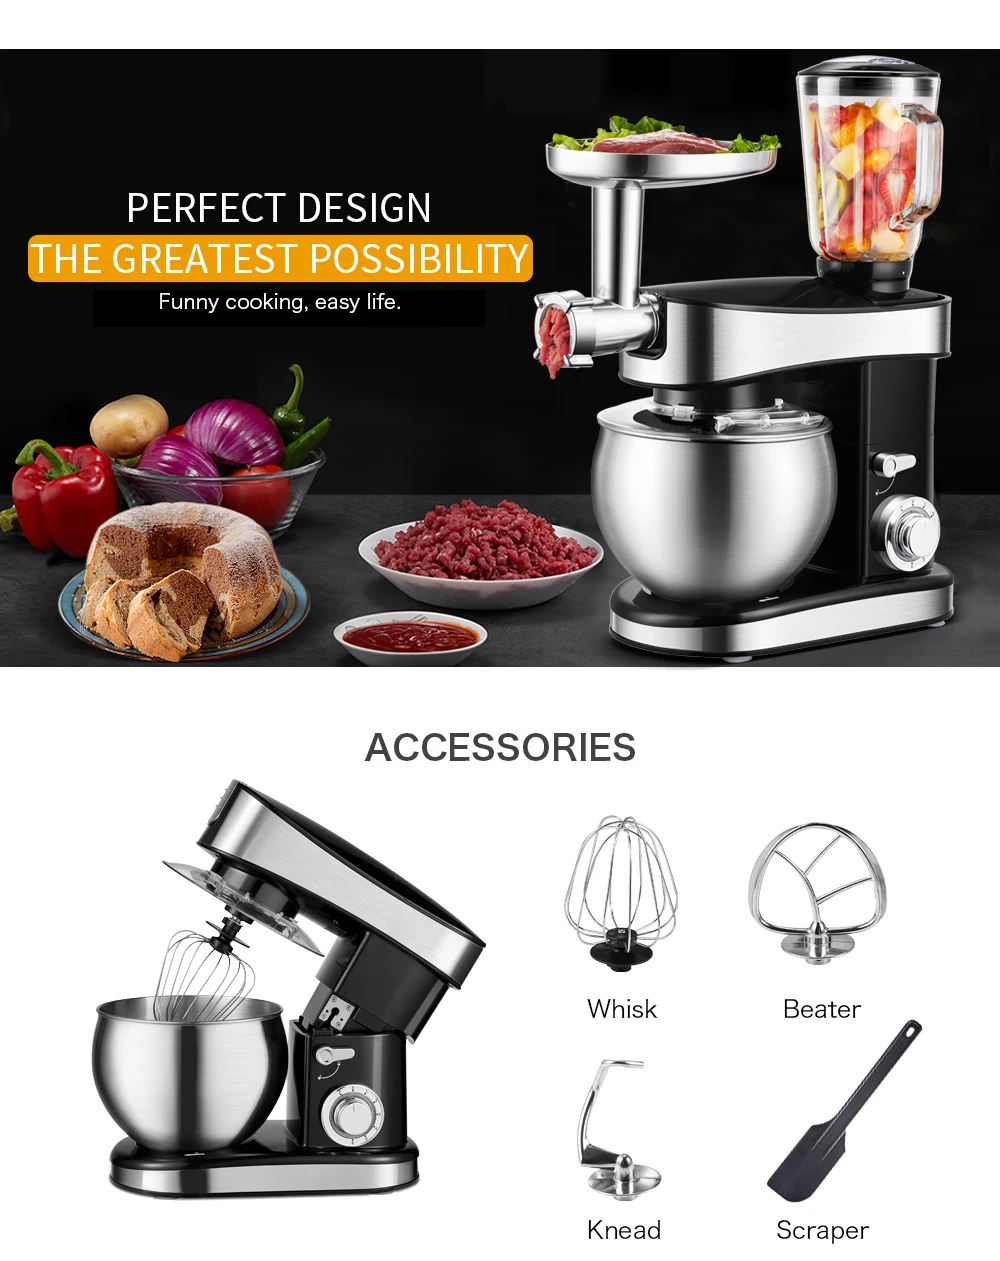 Zhoutu 1500W Planetary Mixer with 5.5L Stainless Steel Bowl ,Kitchen Stand Mixer Meat Grinder